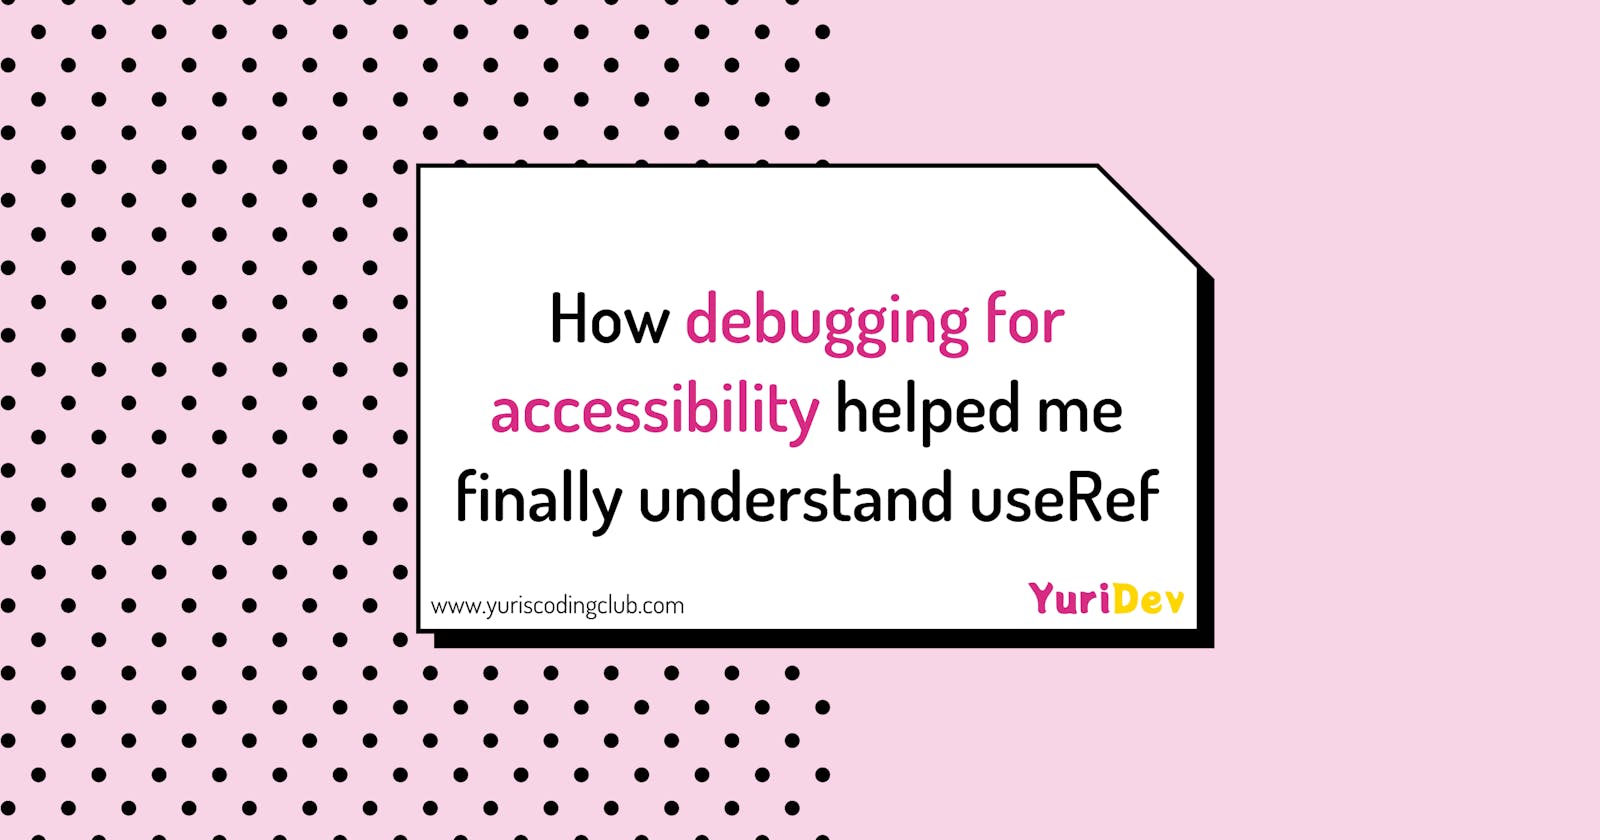 How debugging for accessibility helped me finally understand useRef